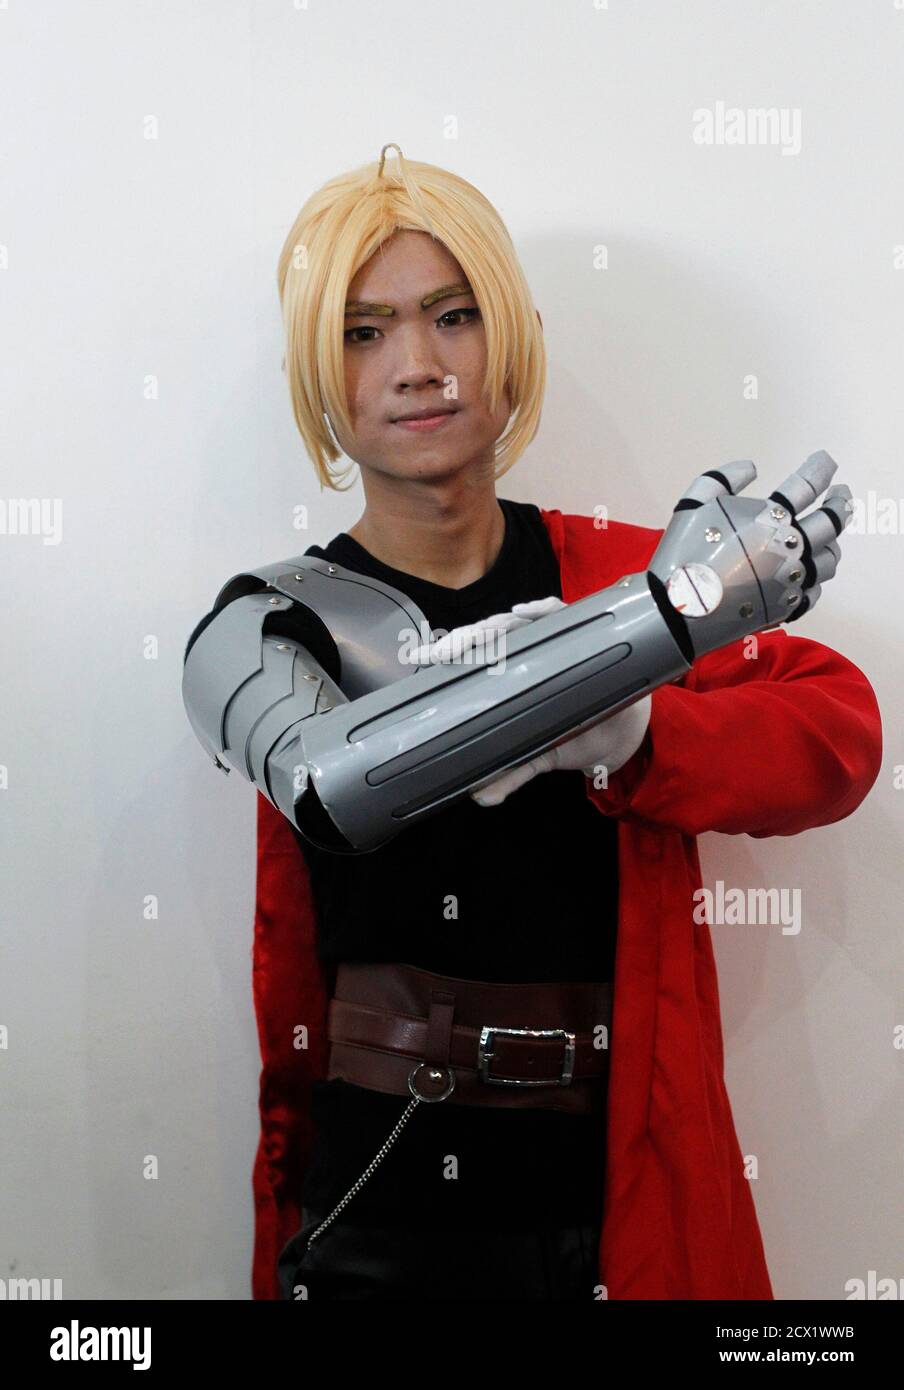 A youth, dressed as the character Edward Elric from "Fullmetal Alchemist",  poses for a picture during a cosplay competition at Saya San Plaza in  Yangon August 3, 2014. Shut off from the